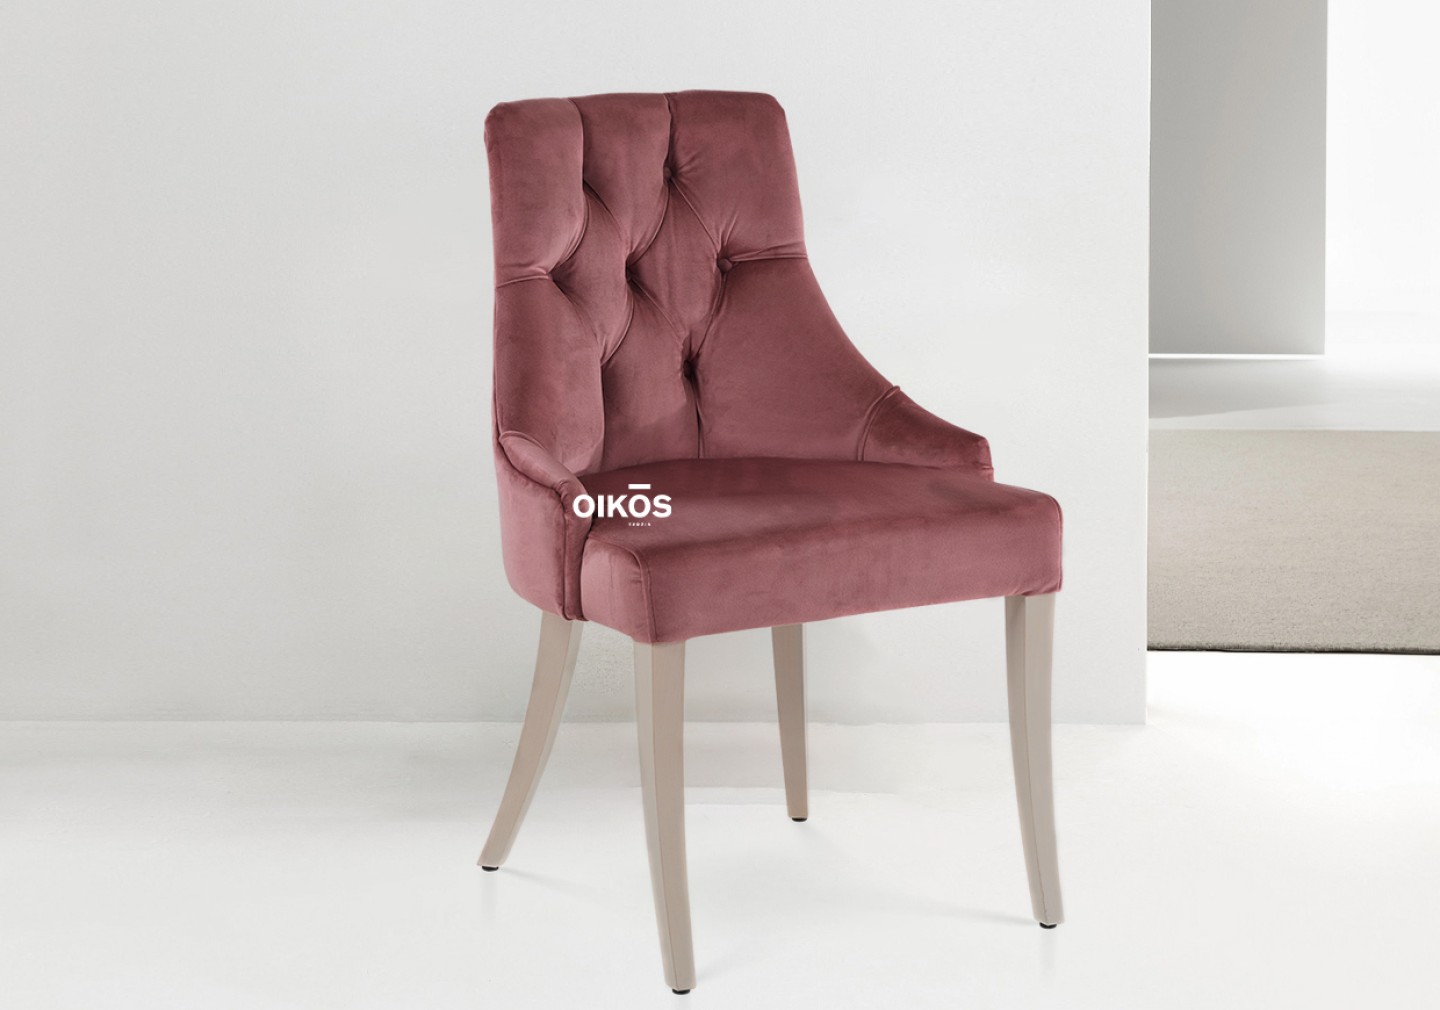 THE ZION DINING CHAIR